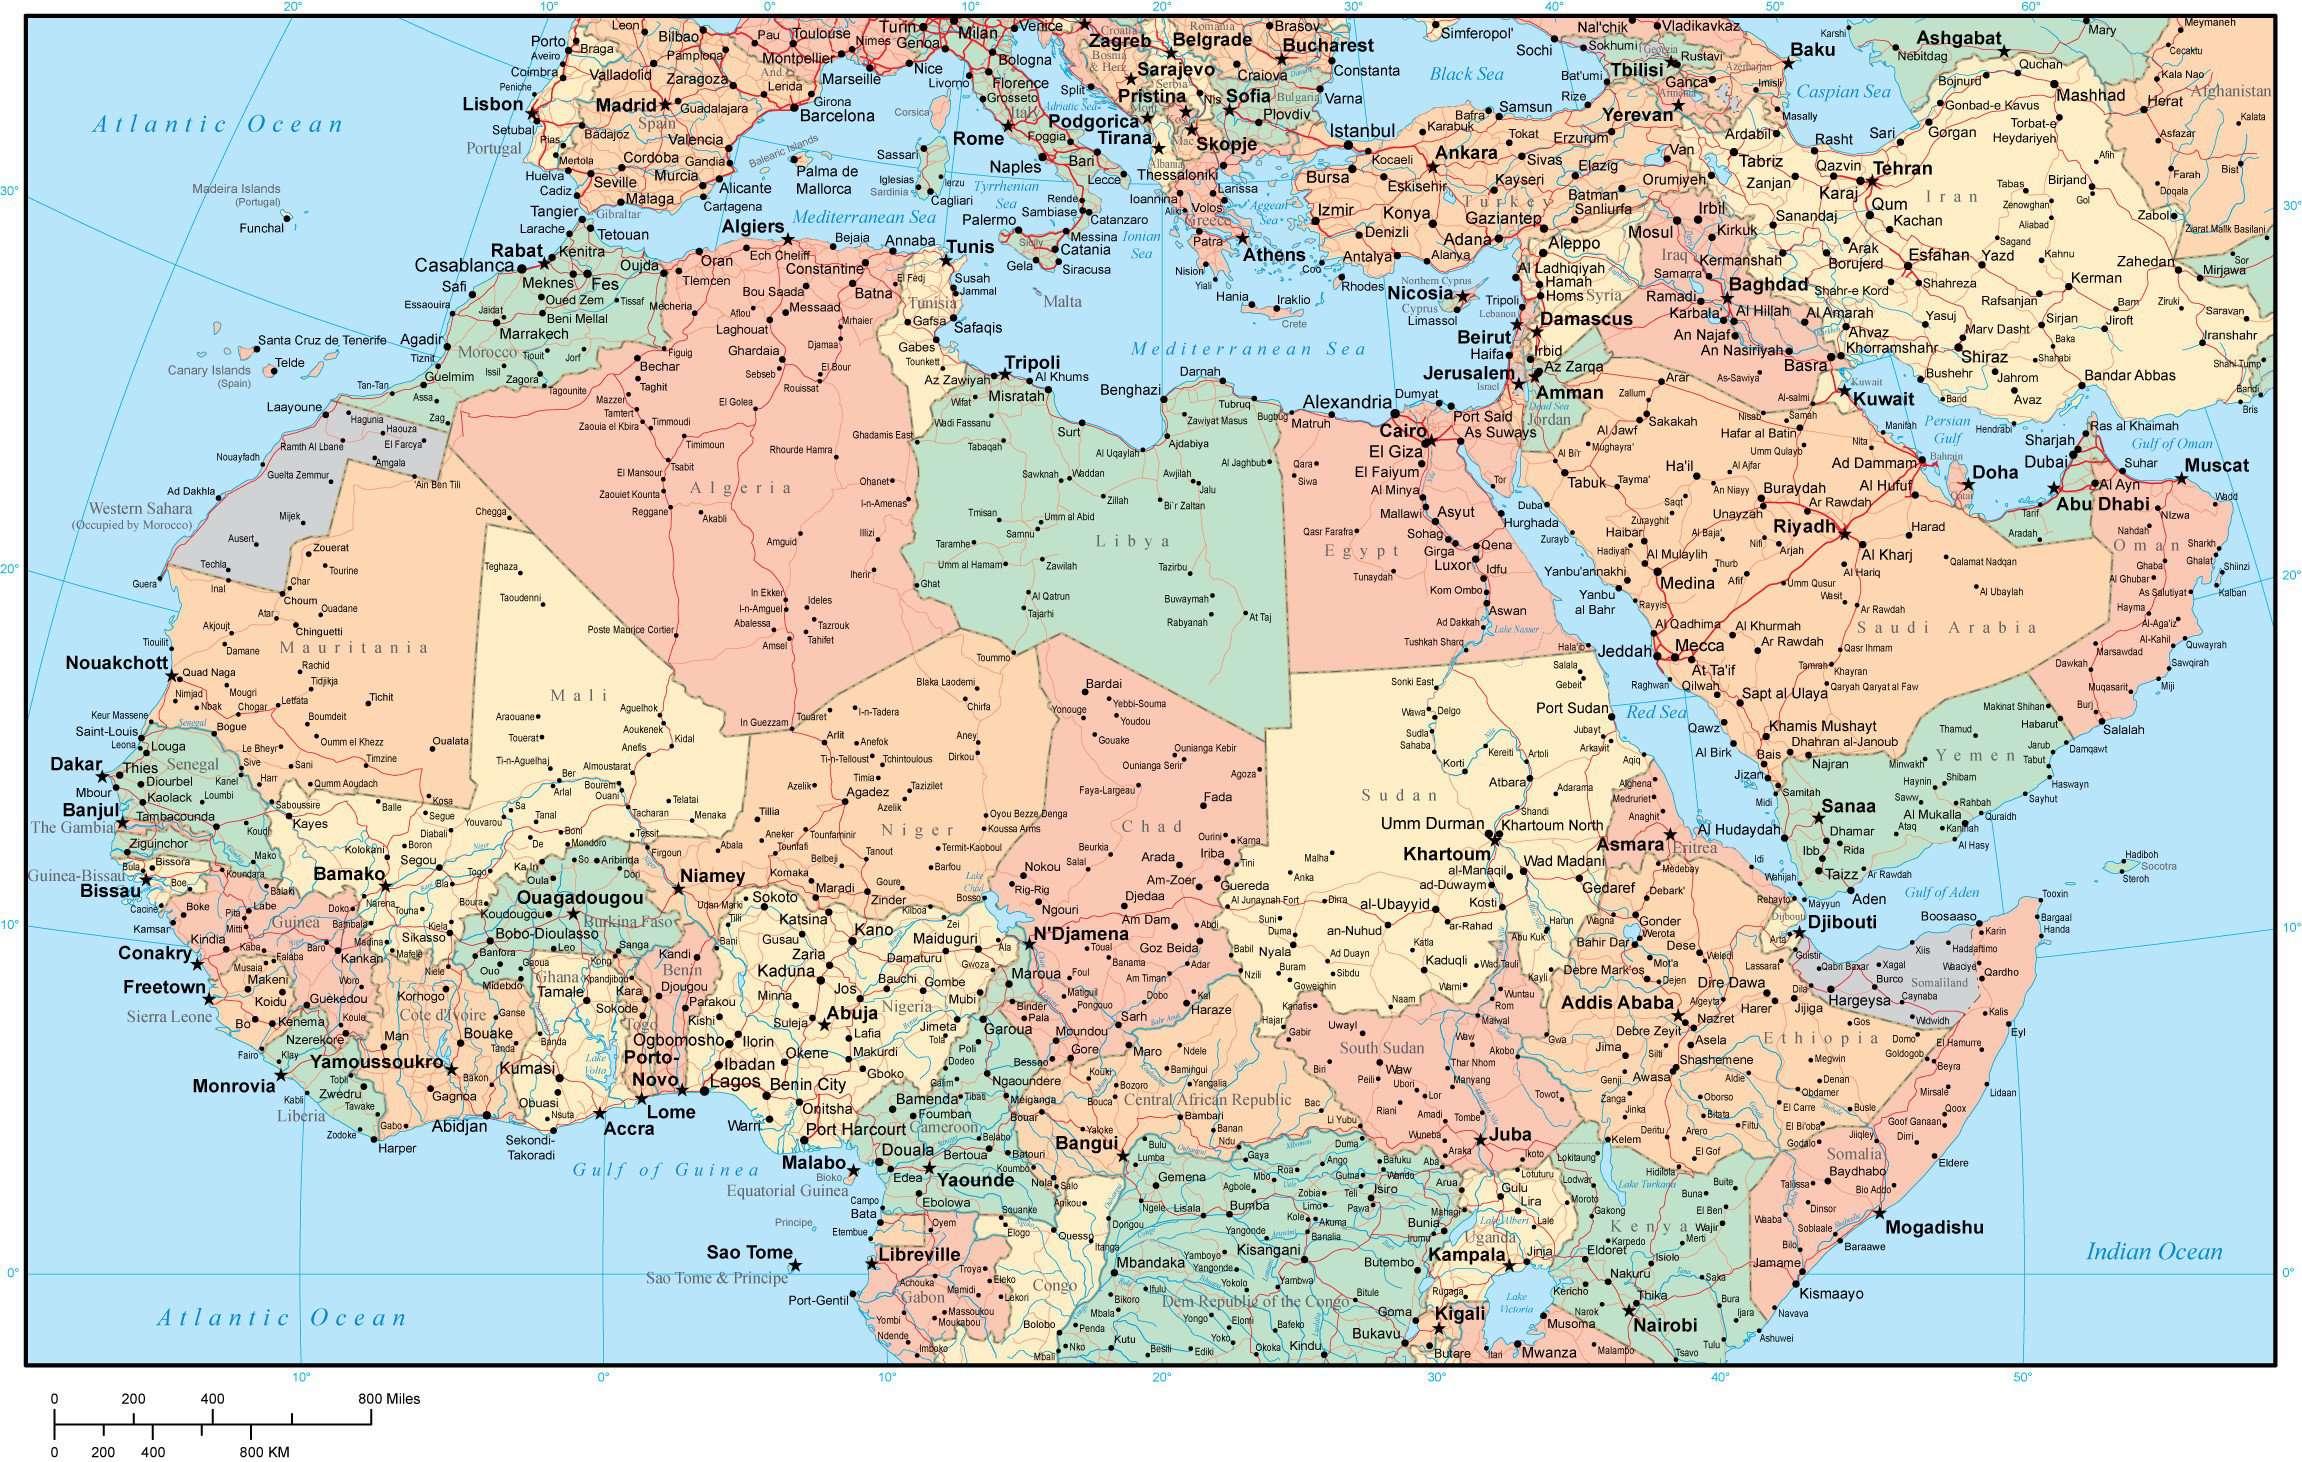 Map Of Northern Africa And Middle East - Get Latest Map Update